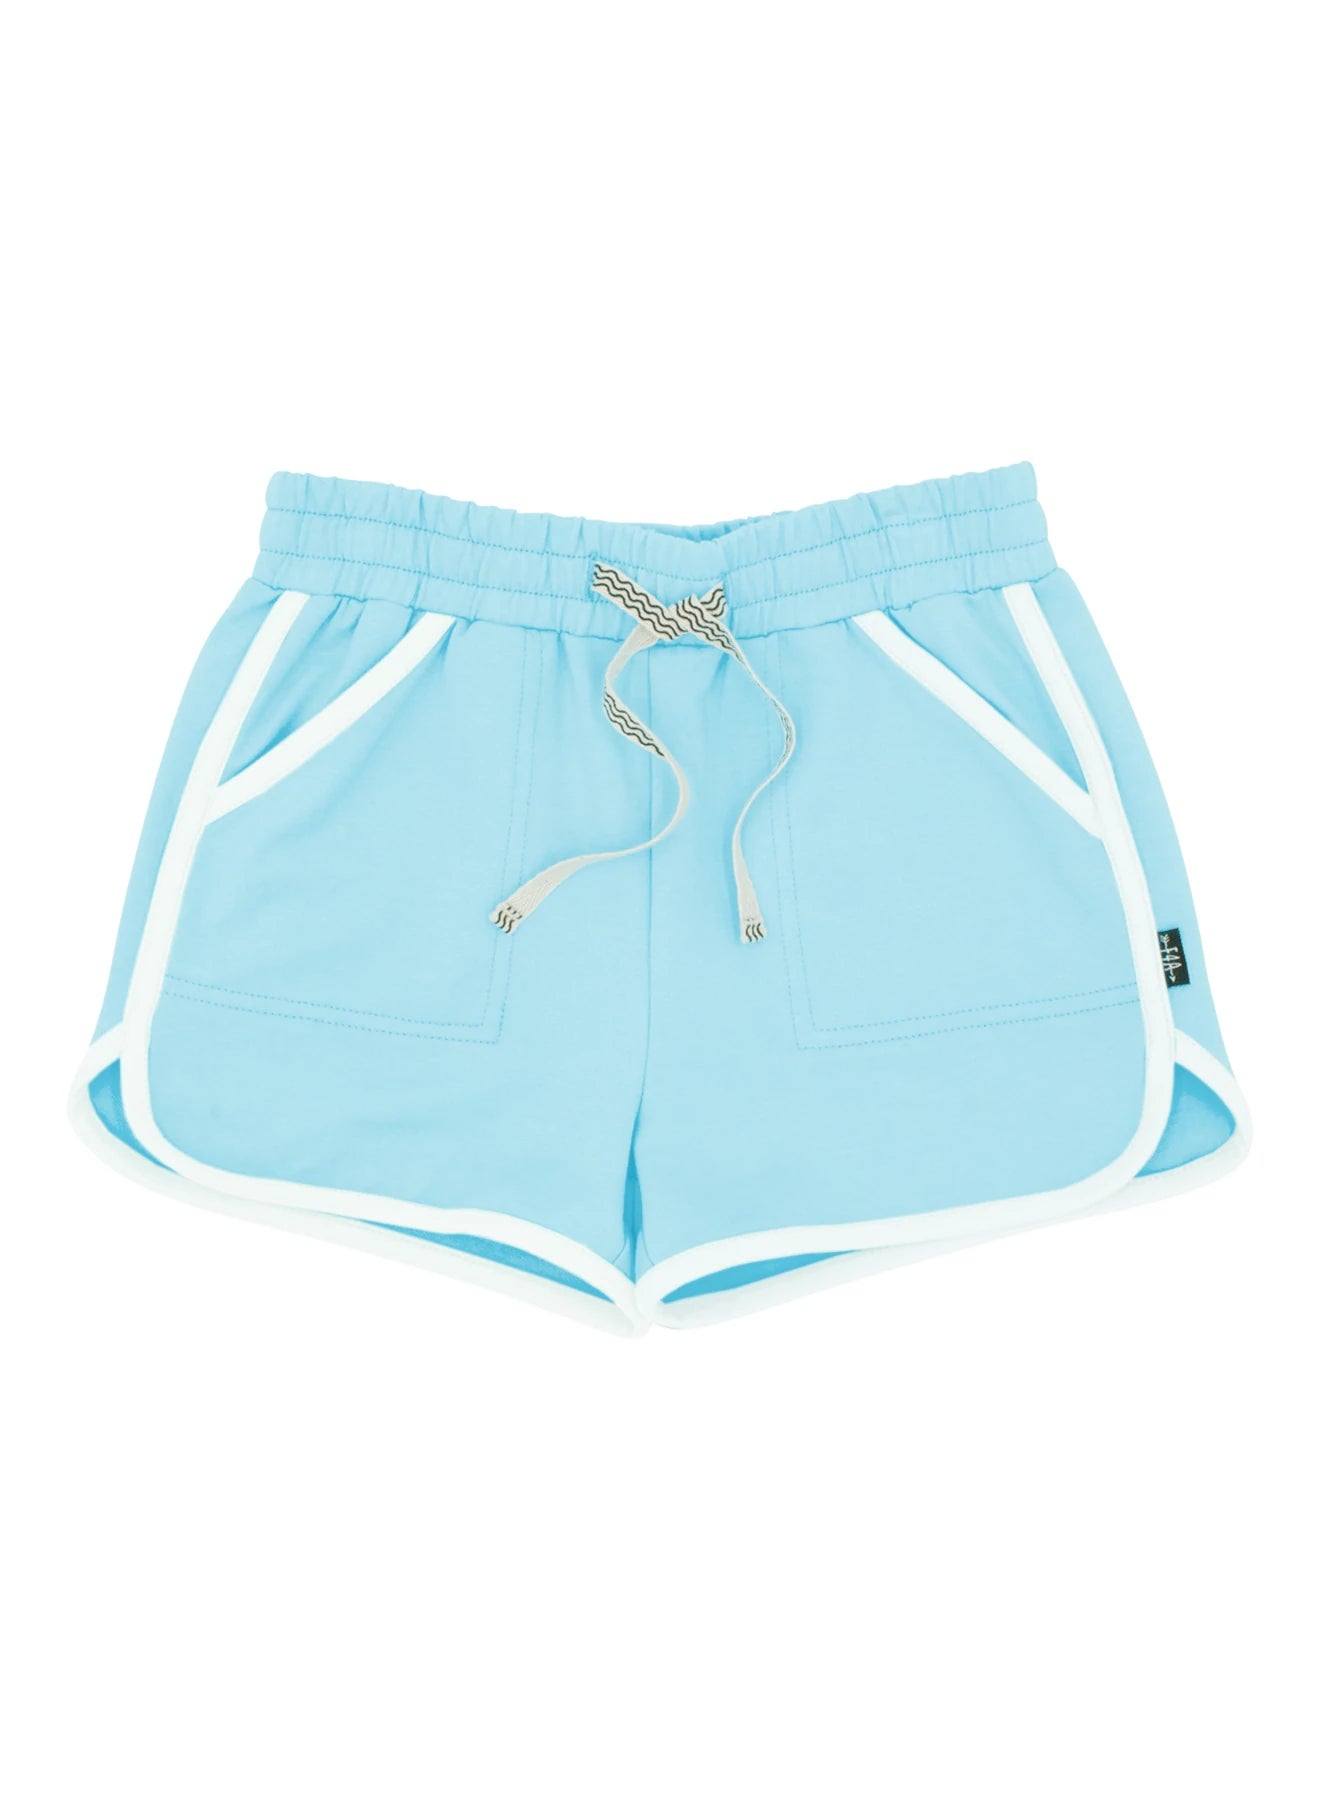 Daisy Shorts in Crystal Blue  - Doodlebug's Children's Boutique